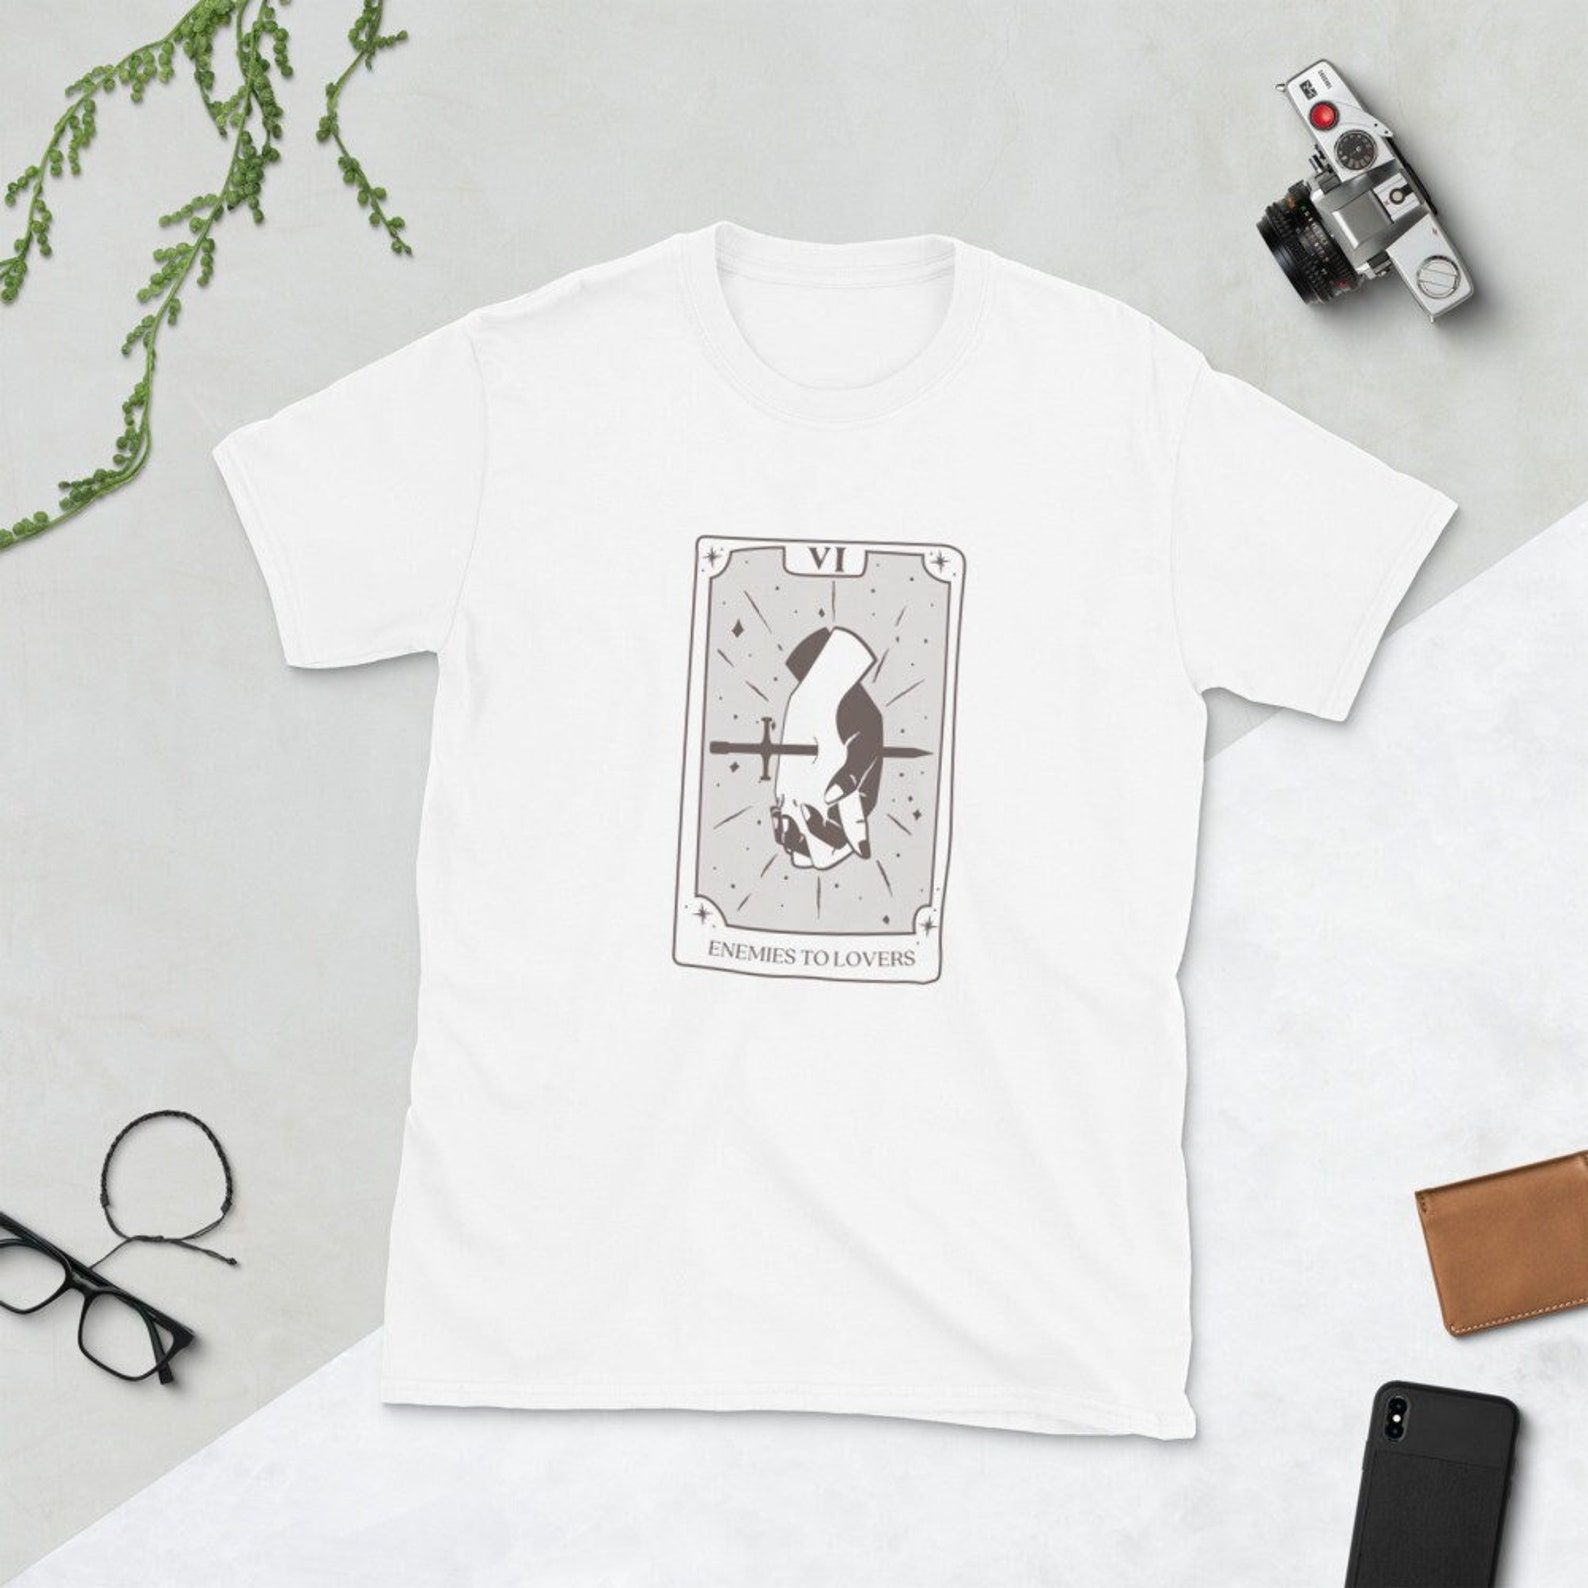 Image of a white t-shirt on a whit background. It has a tarot card in the center with two hands entwined and a sword through them. It's called the enemies to lovers card. 